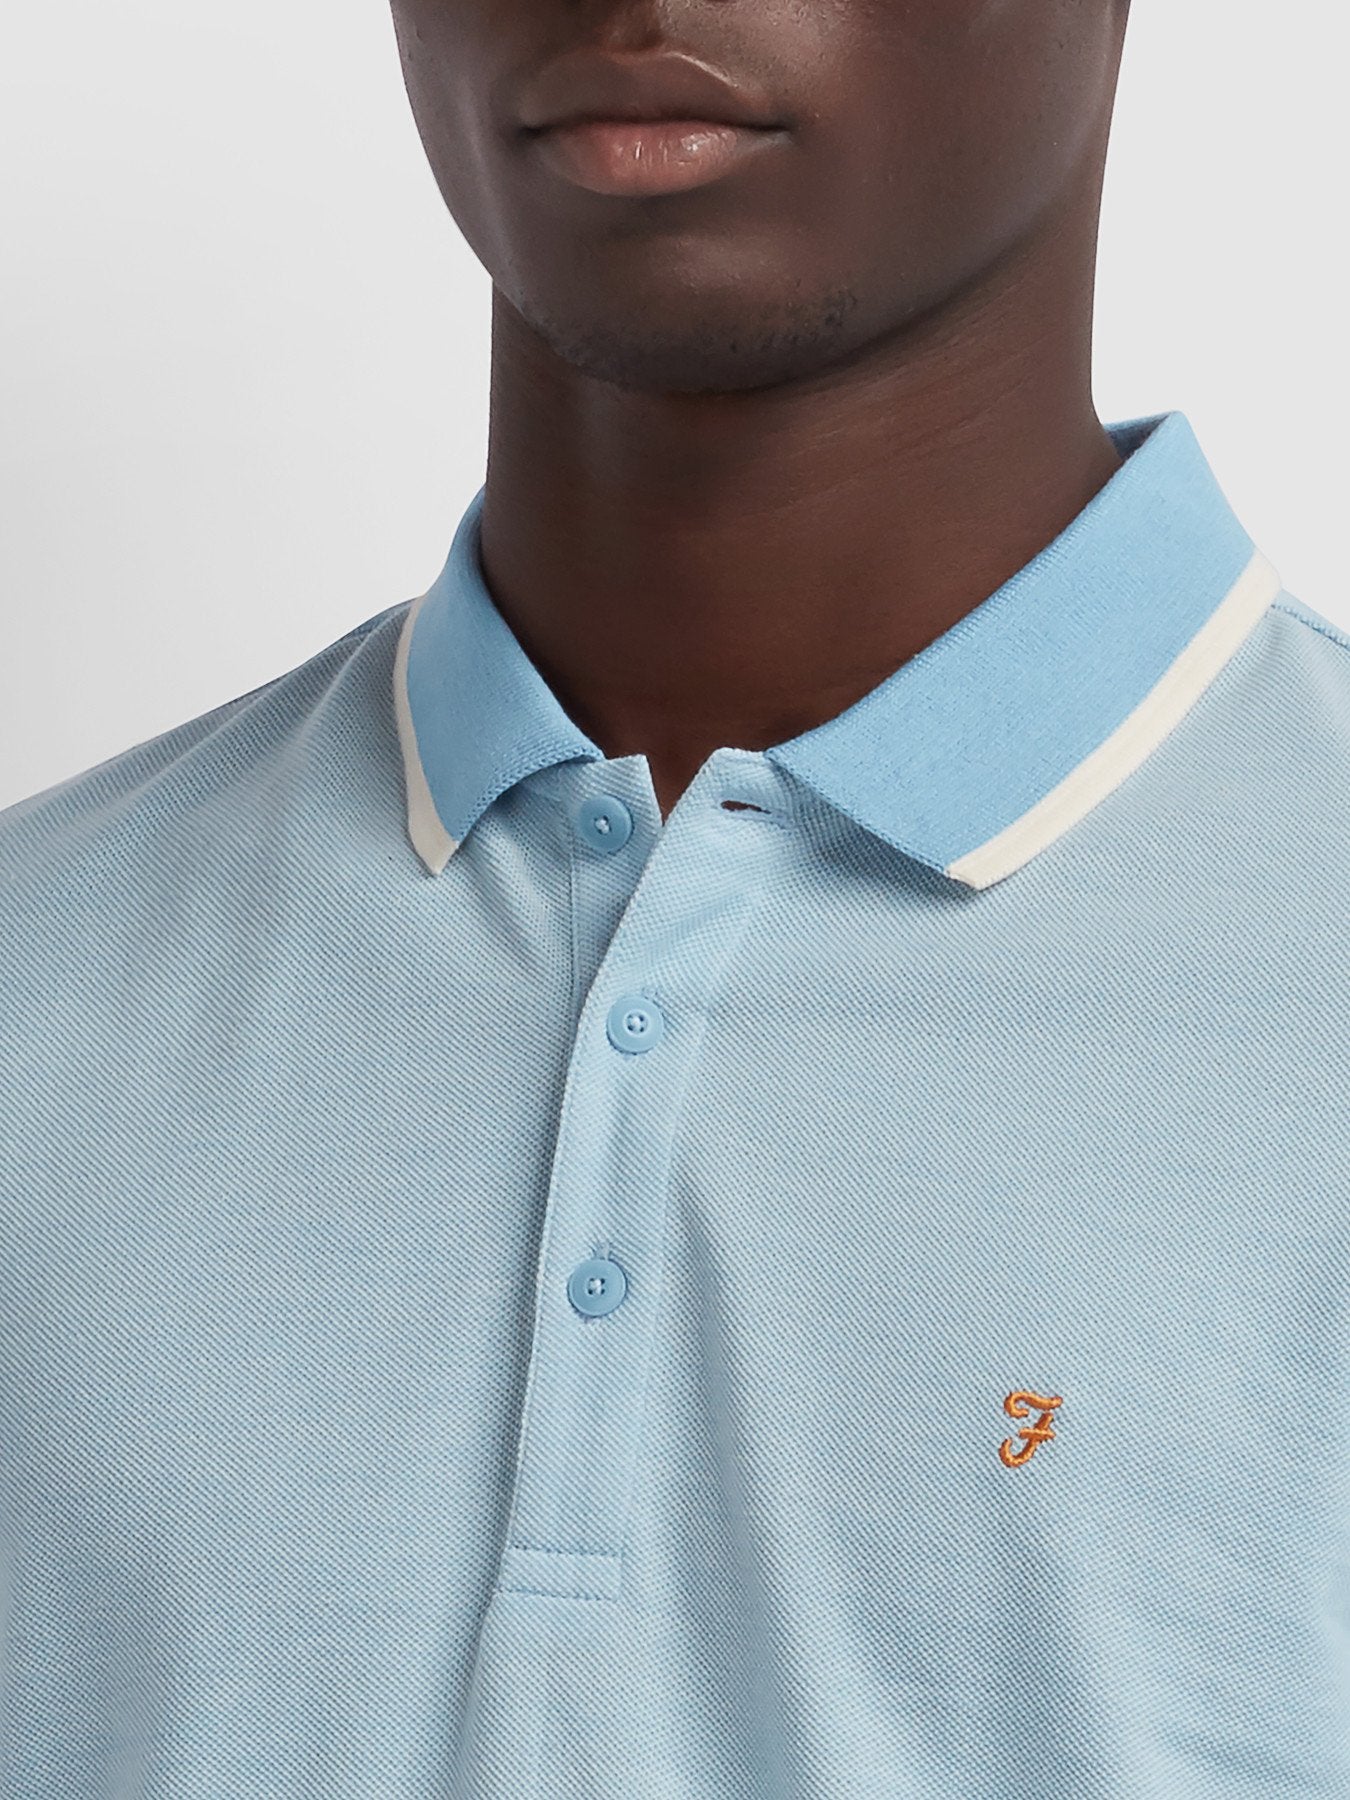 Farah Basel Slim Fit Tipped Polo Shirt In Moonstone